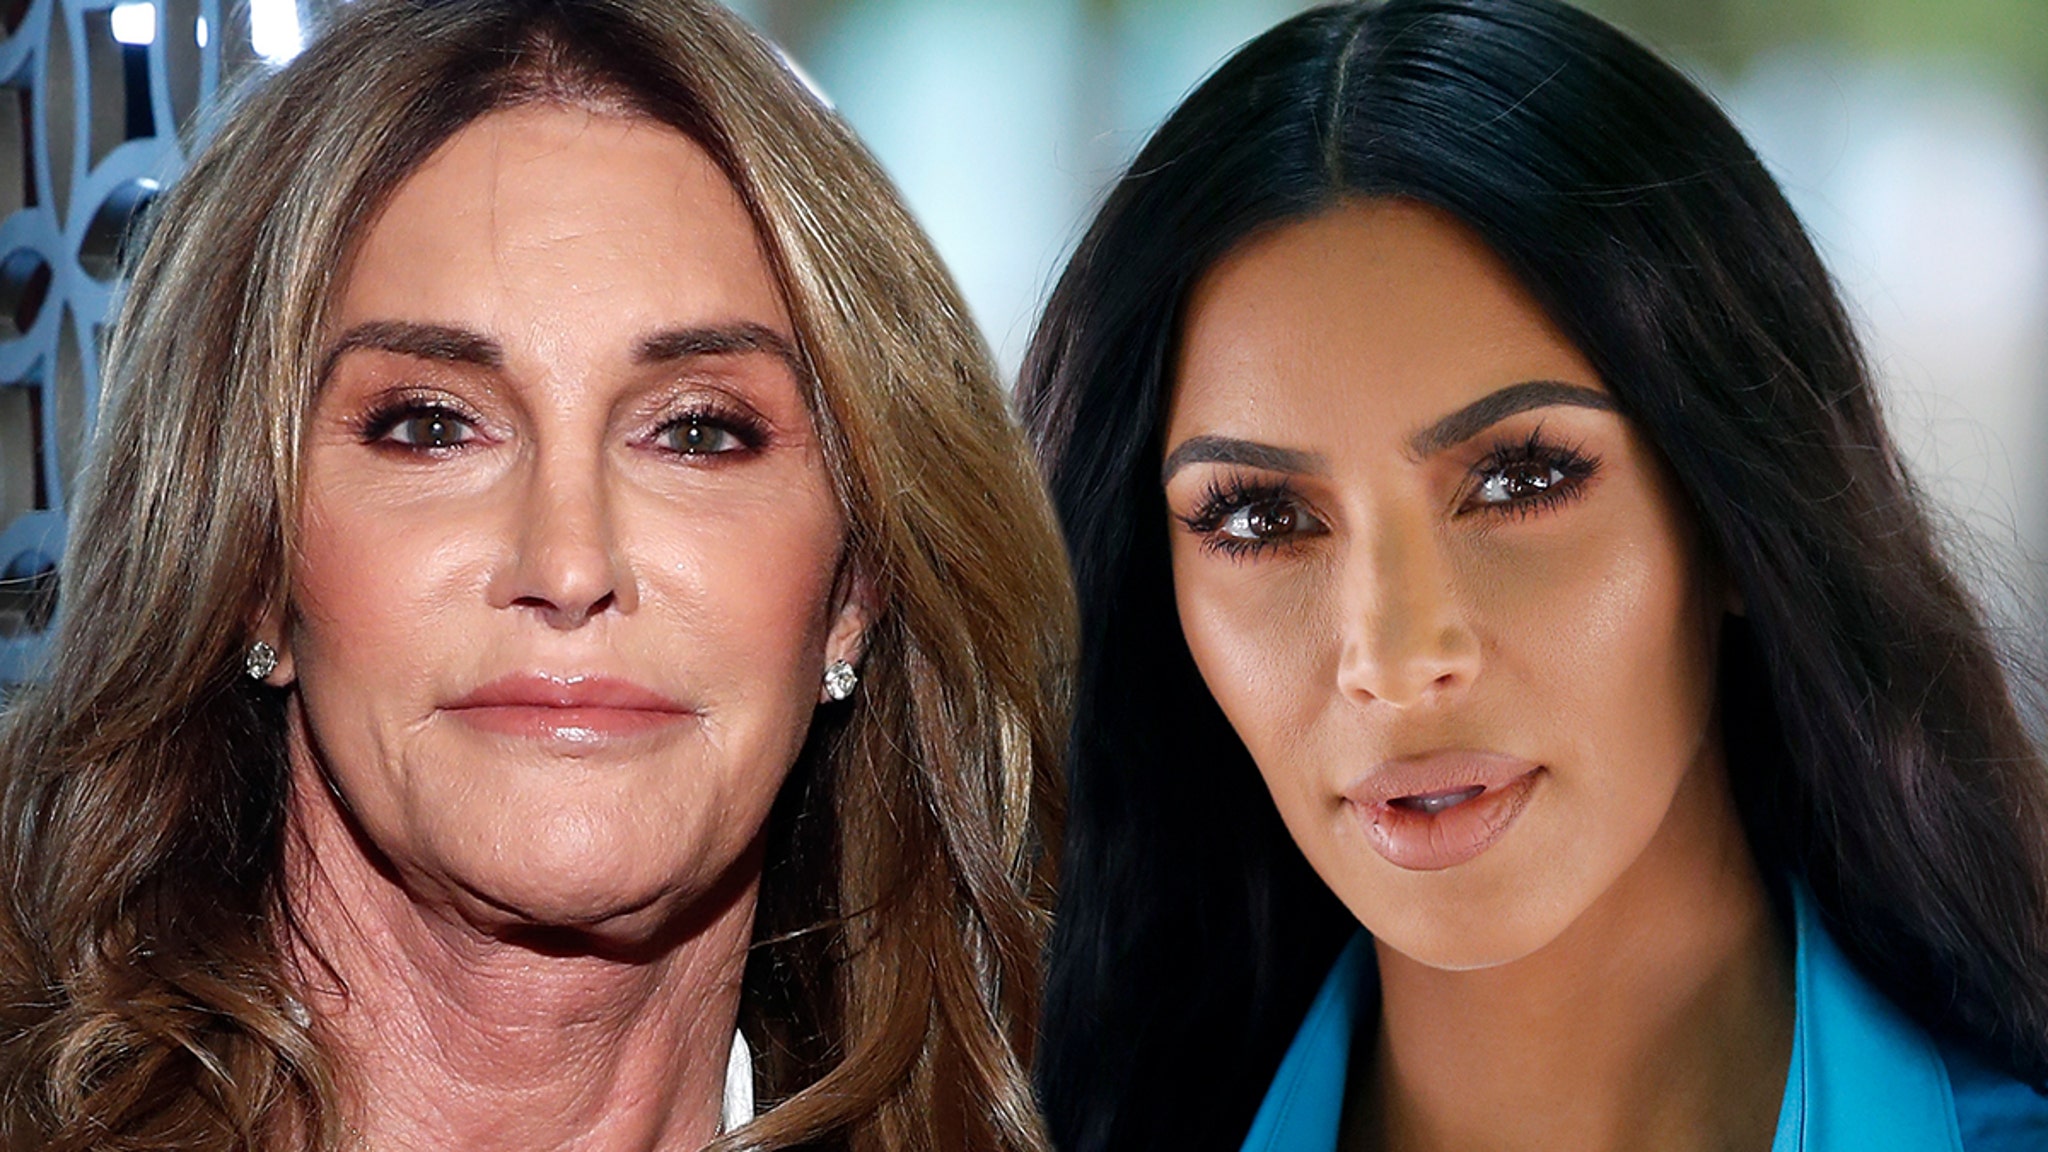 Caitlyn Jenner Wasn’t Trying to Diss Kim Kardashian with ‘Calculated’ Remark